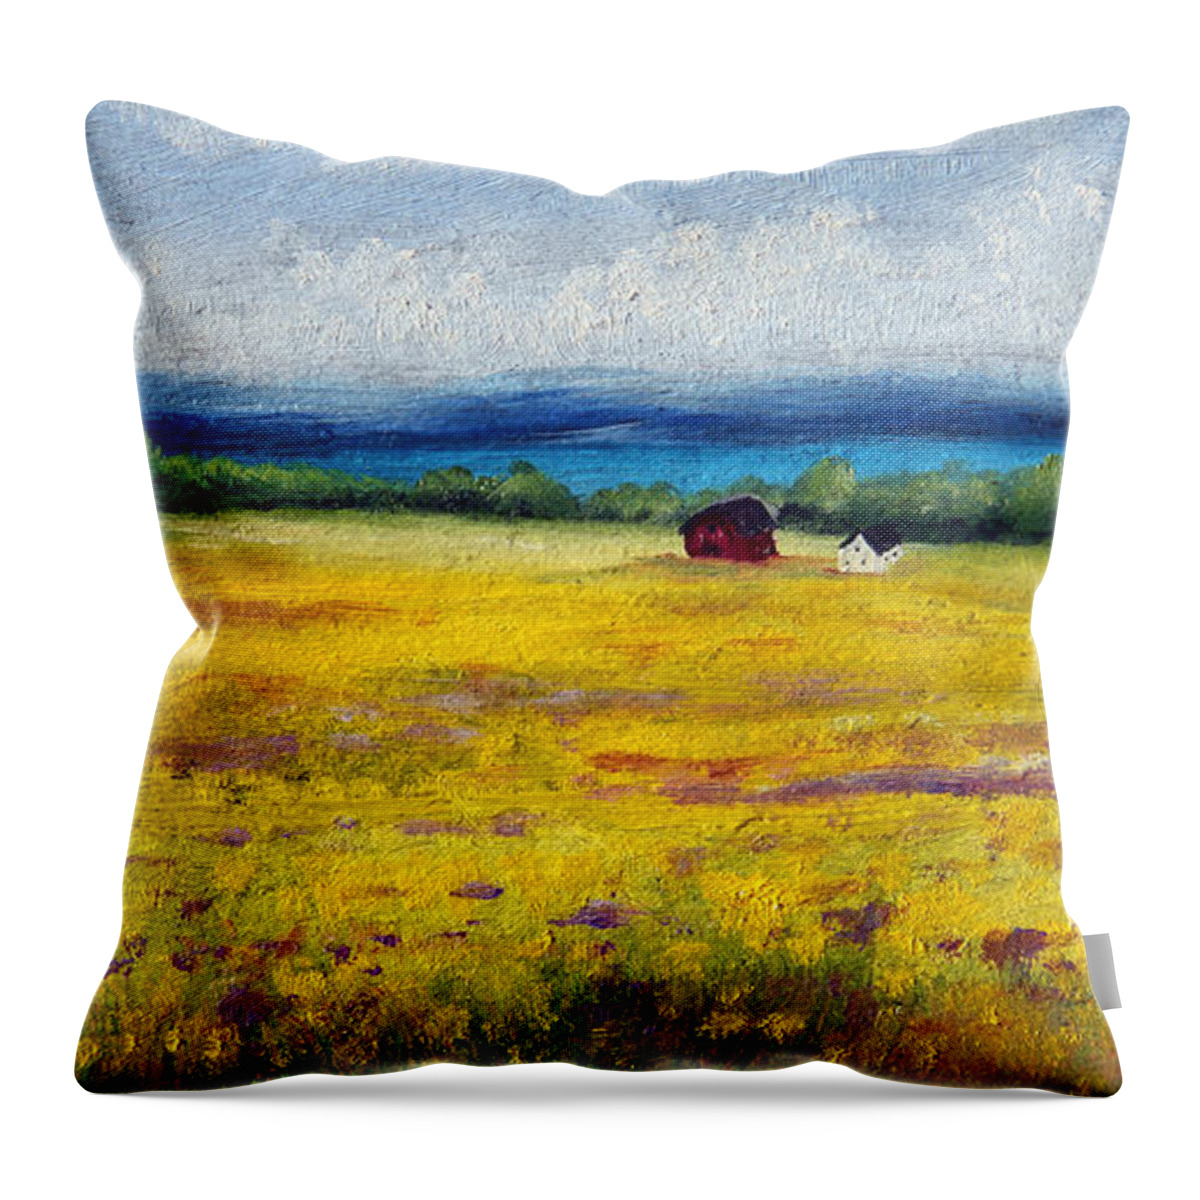 Landscape Throw Pillow featuring the painting Lakeside Mustard Fields by Meaghan Troup